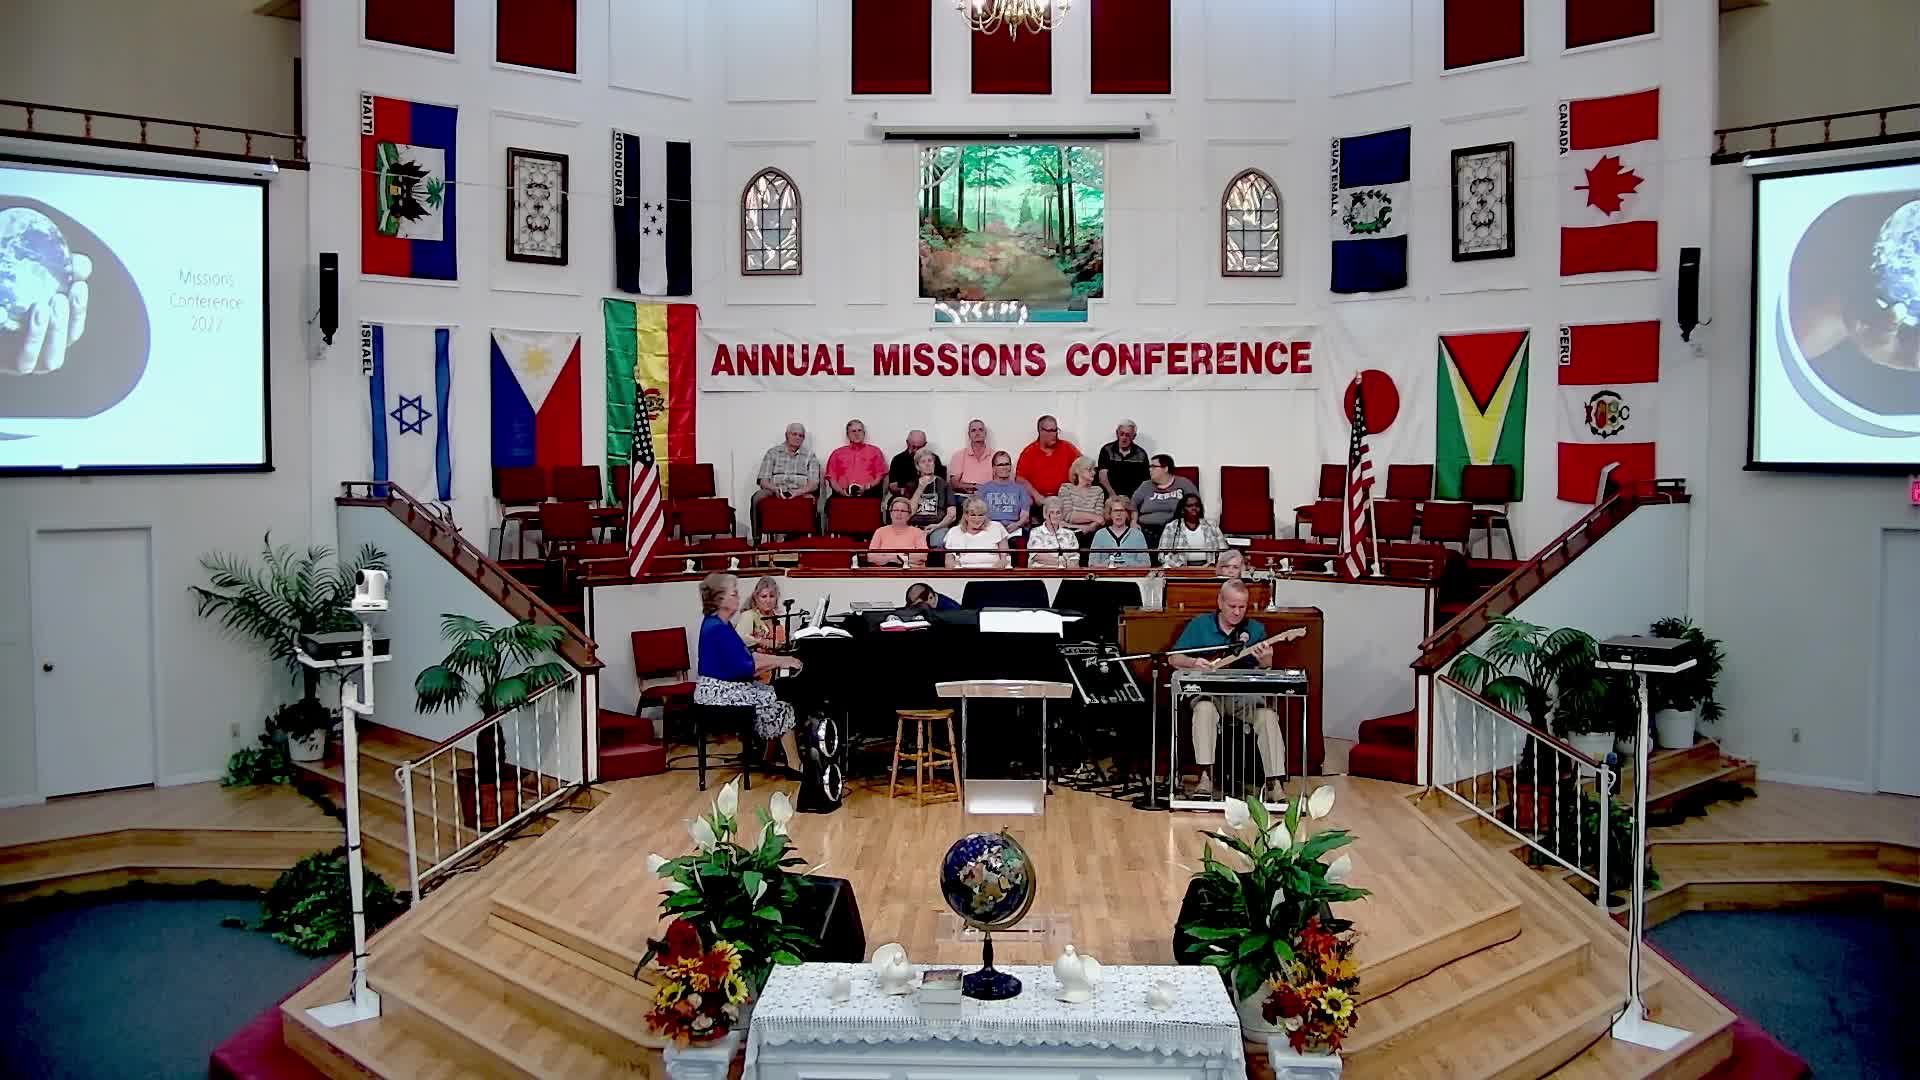 Mission Conference Day 2